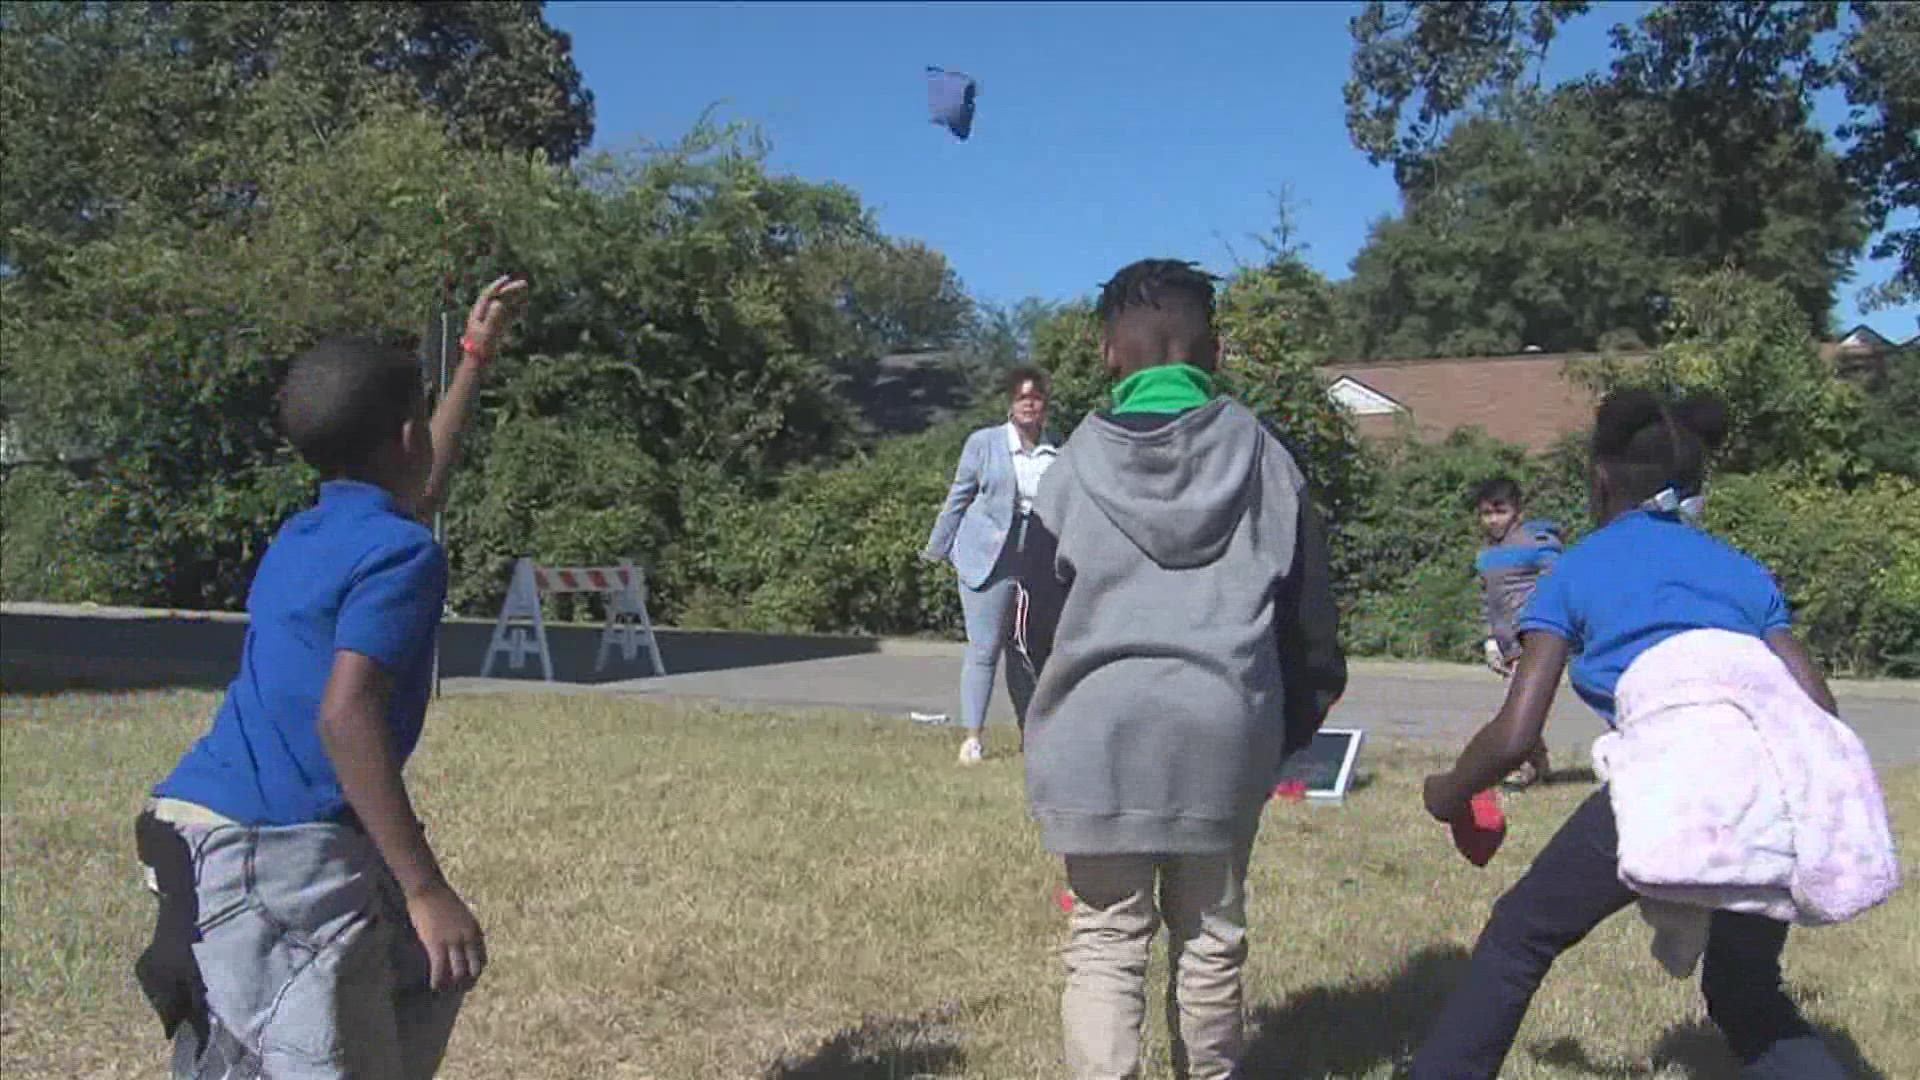 Two Memphis empowerment organizations celebrated Youth Confidence Day Thursday at Belle Forest Community School.